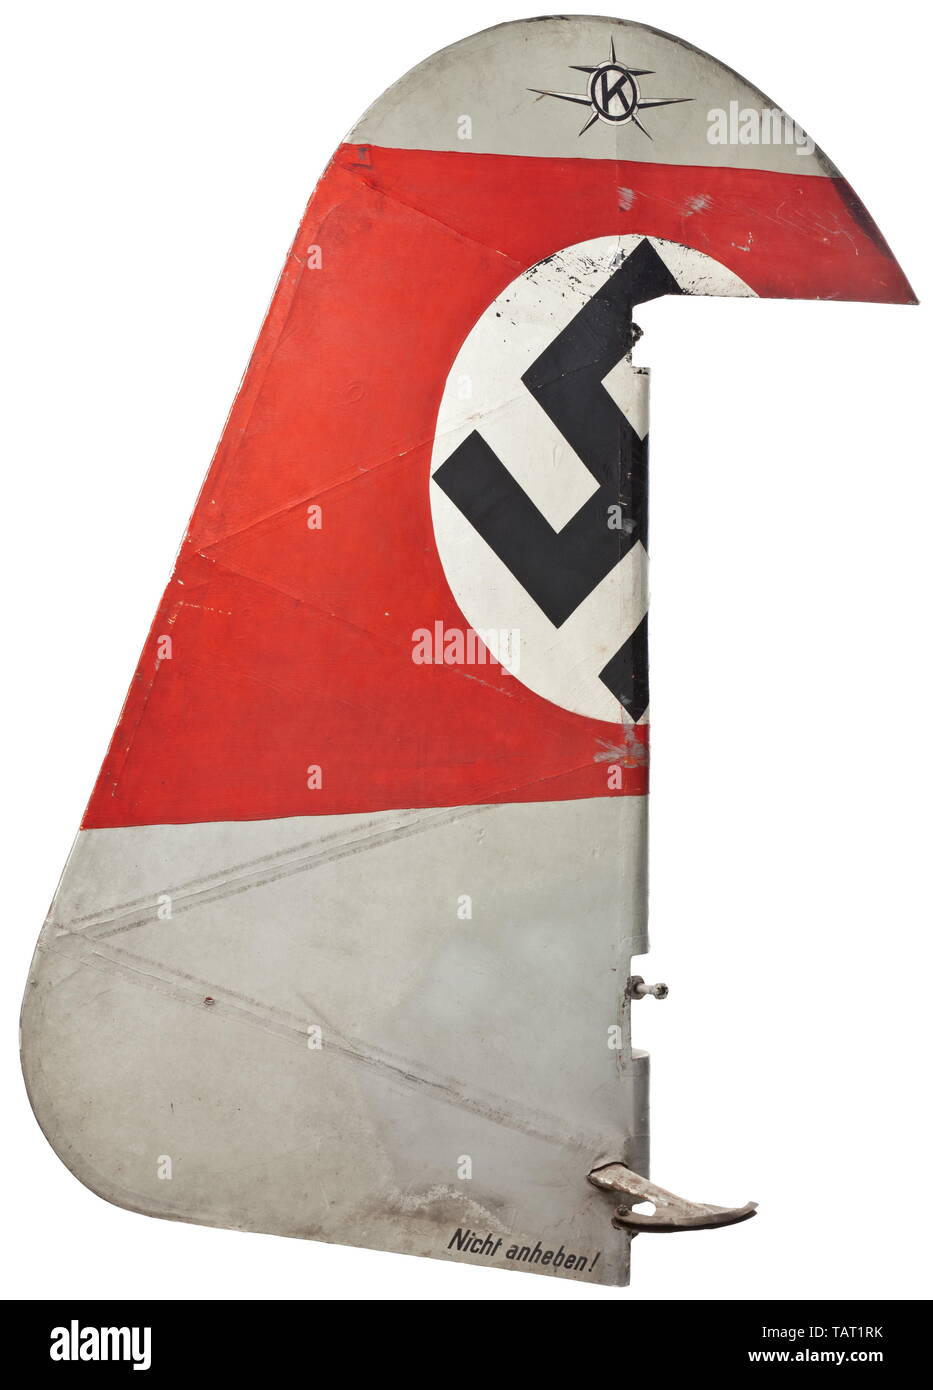 Pilot Georg Resch - a movable empennage of the Klemm 25 with registration 'D-ENIP', Lightweight rudder with original finish. At top the emblem of the Klemm aircraft company, at centre a swastika on white ground and red banner. At bottom the inscription 'Georg Resch, München Tal 33.' At the side a plaque with type specifications 'LFK Kennzeichen - L 25 Sr 6', mounted parts. Dimensions circa 130 x 100 x 33 cm. The Klemm 25, later Kl 25, was produced by the German aircraft manufacturer Klemm GmbH. Only very few planes of this type are existent and functioning today. The Kl 25 , Editorial-Use-Only Stock Photo